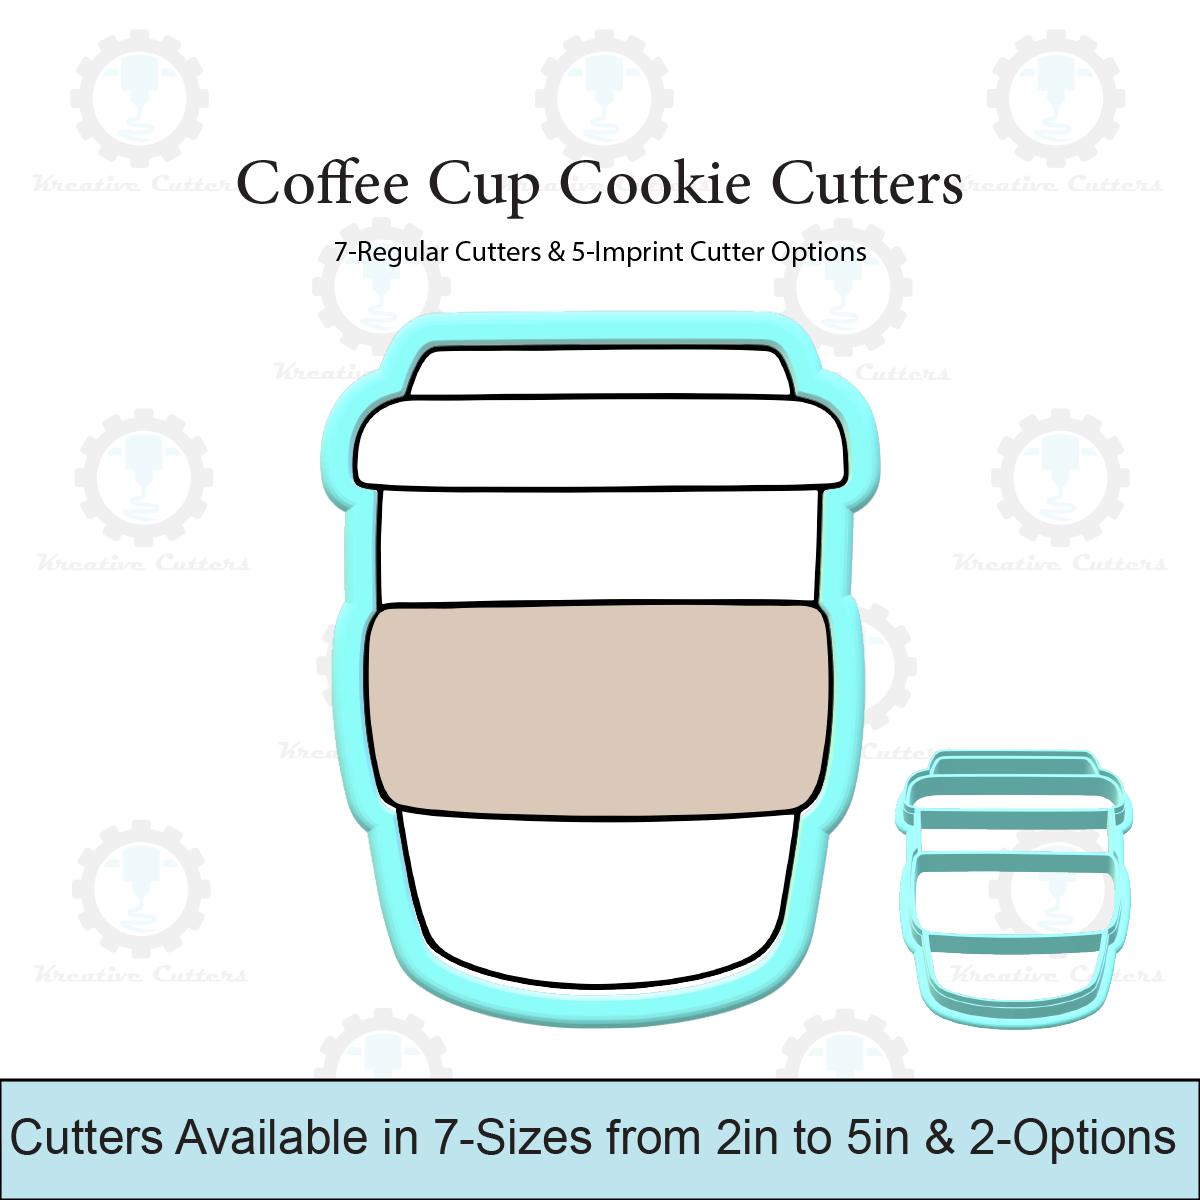 Coffee Cup Cookie Cutters | With Imprint Cutter Option